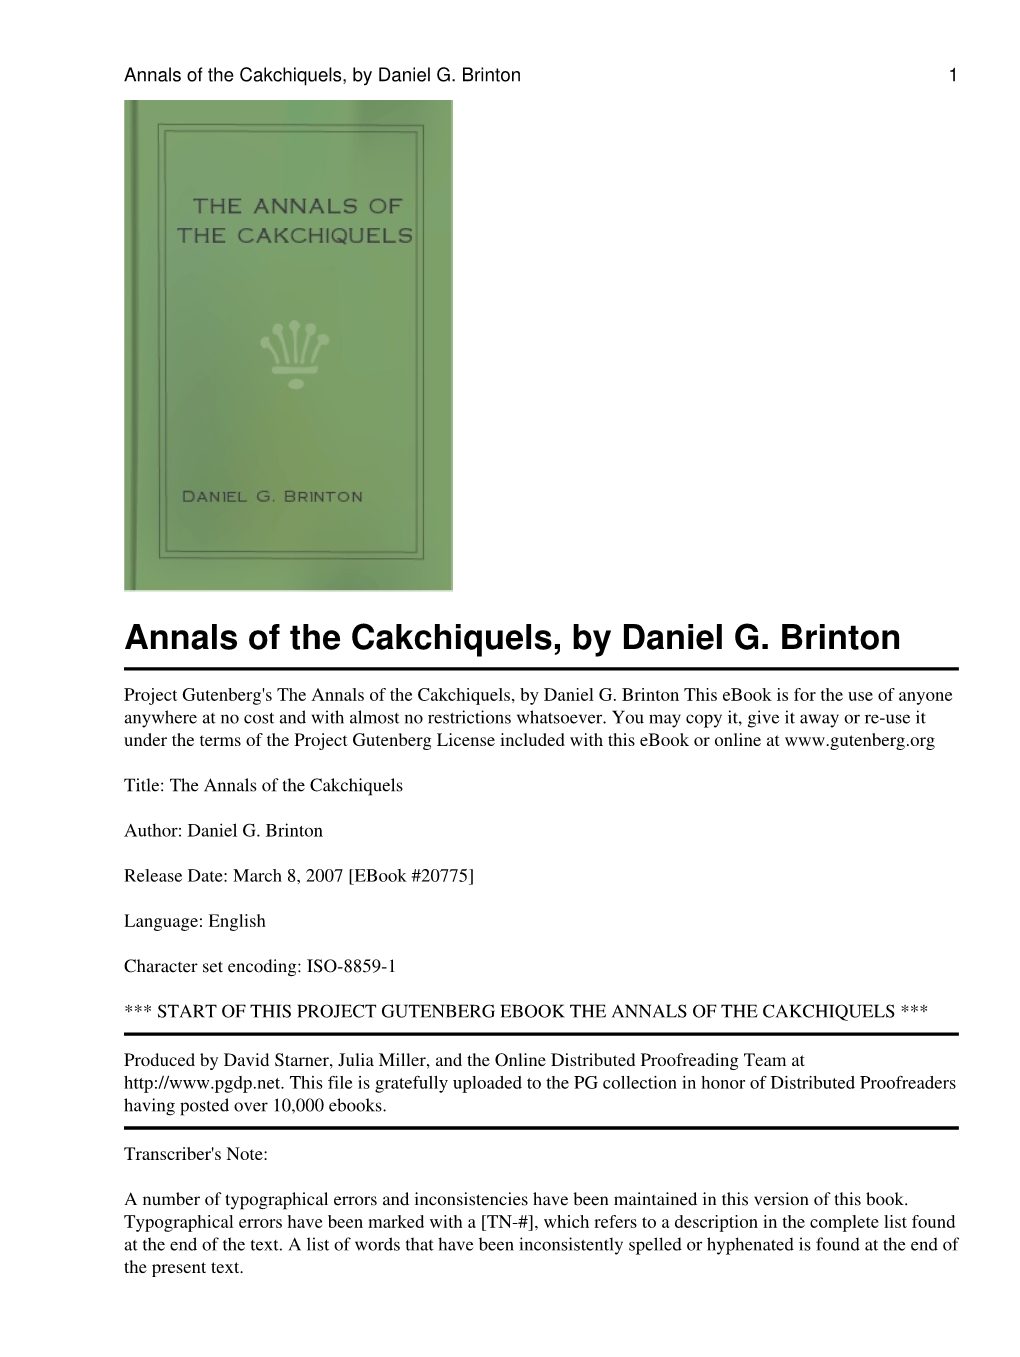 The Annals of the Cakchiquels, by Daniel G